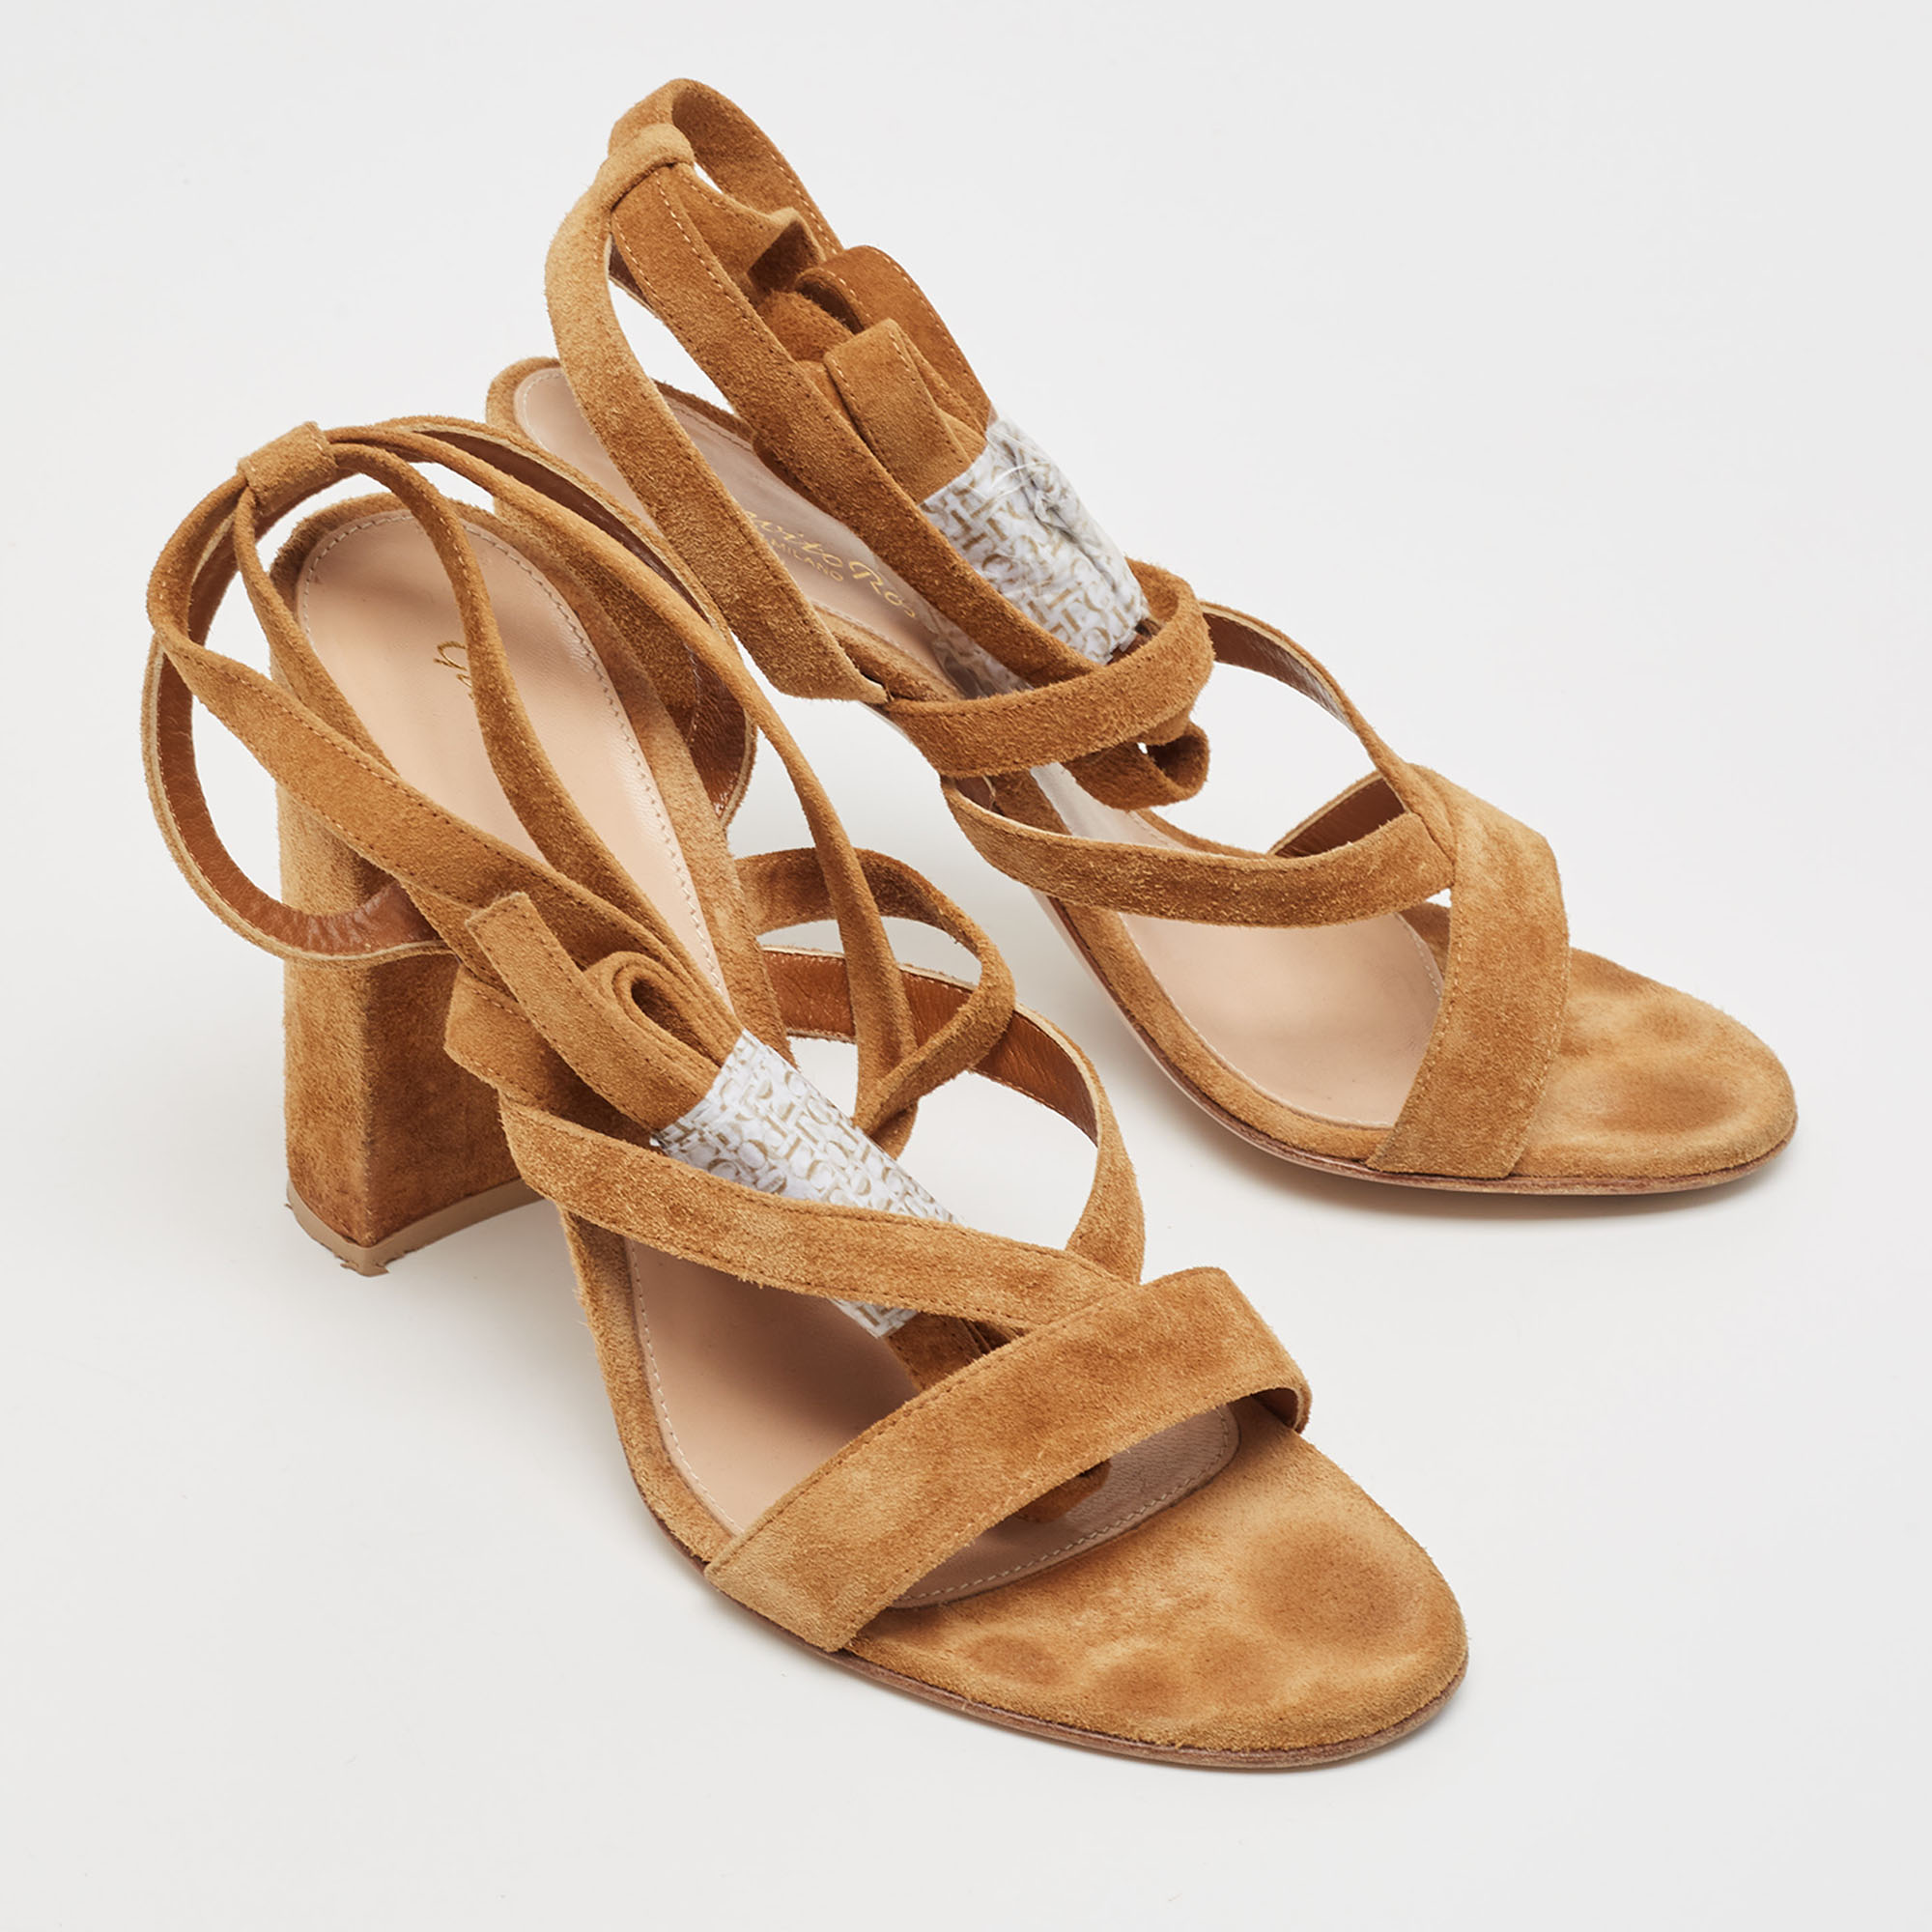 Gianvito Rossi Brown Suede Ankle Wrap Sandals Size 38